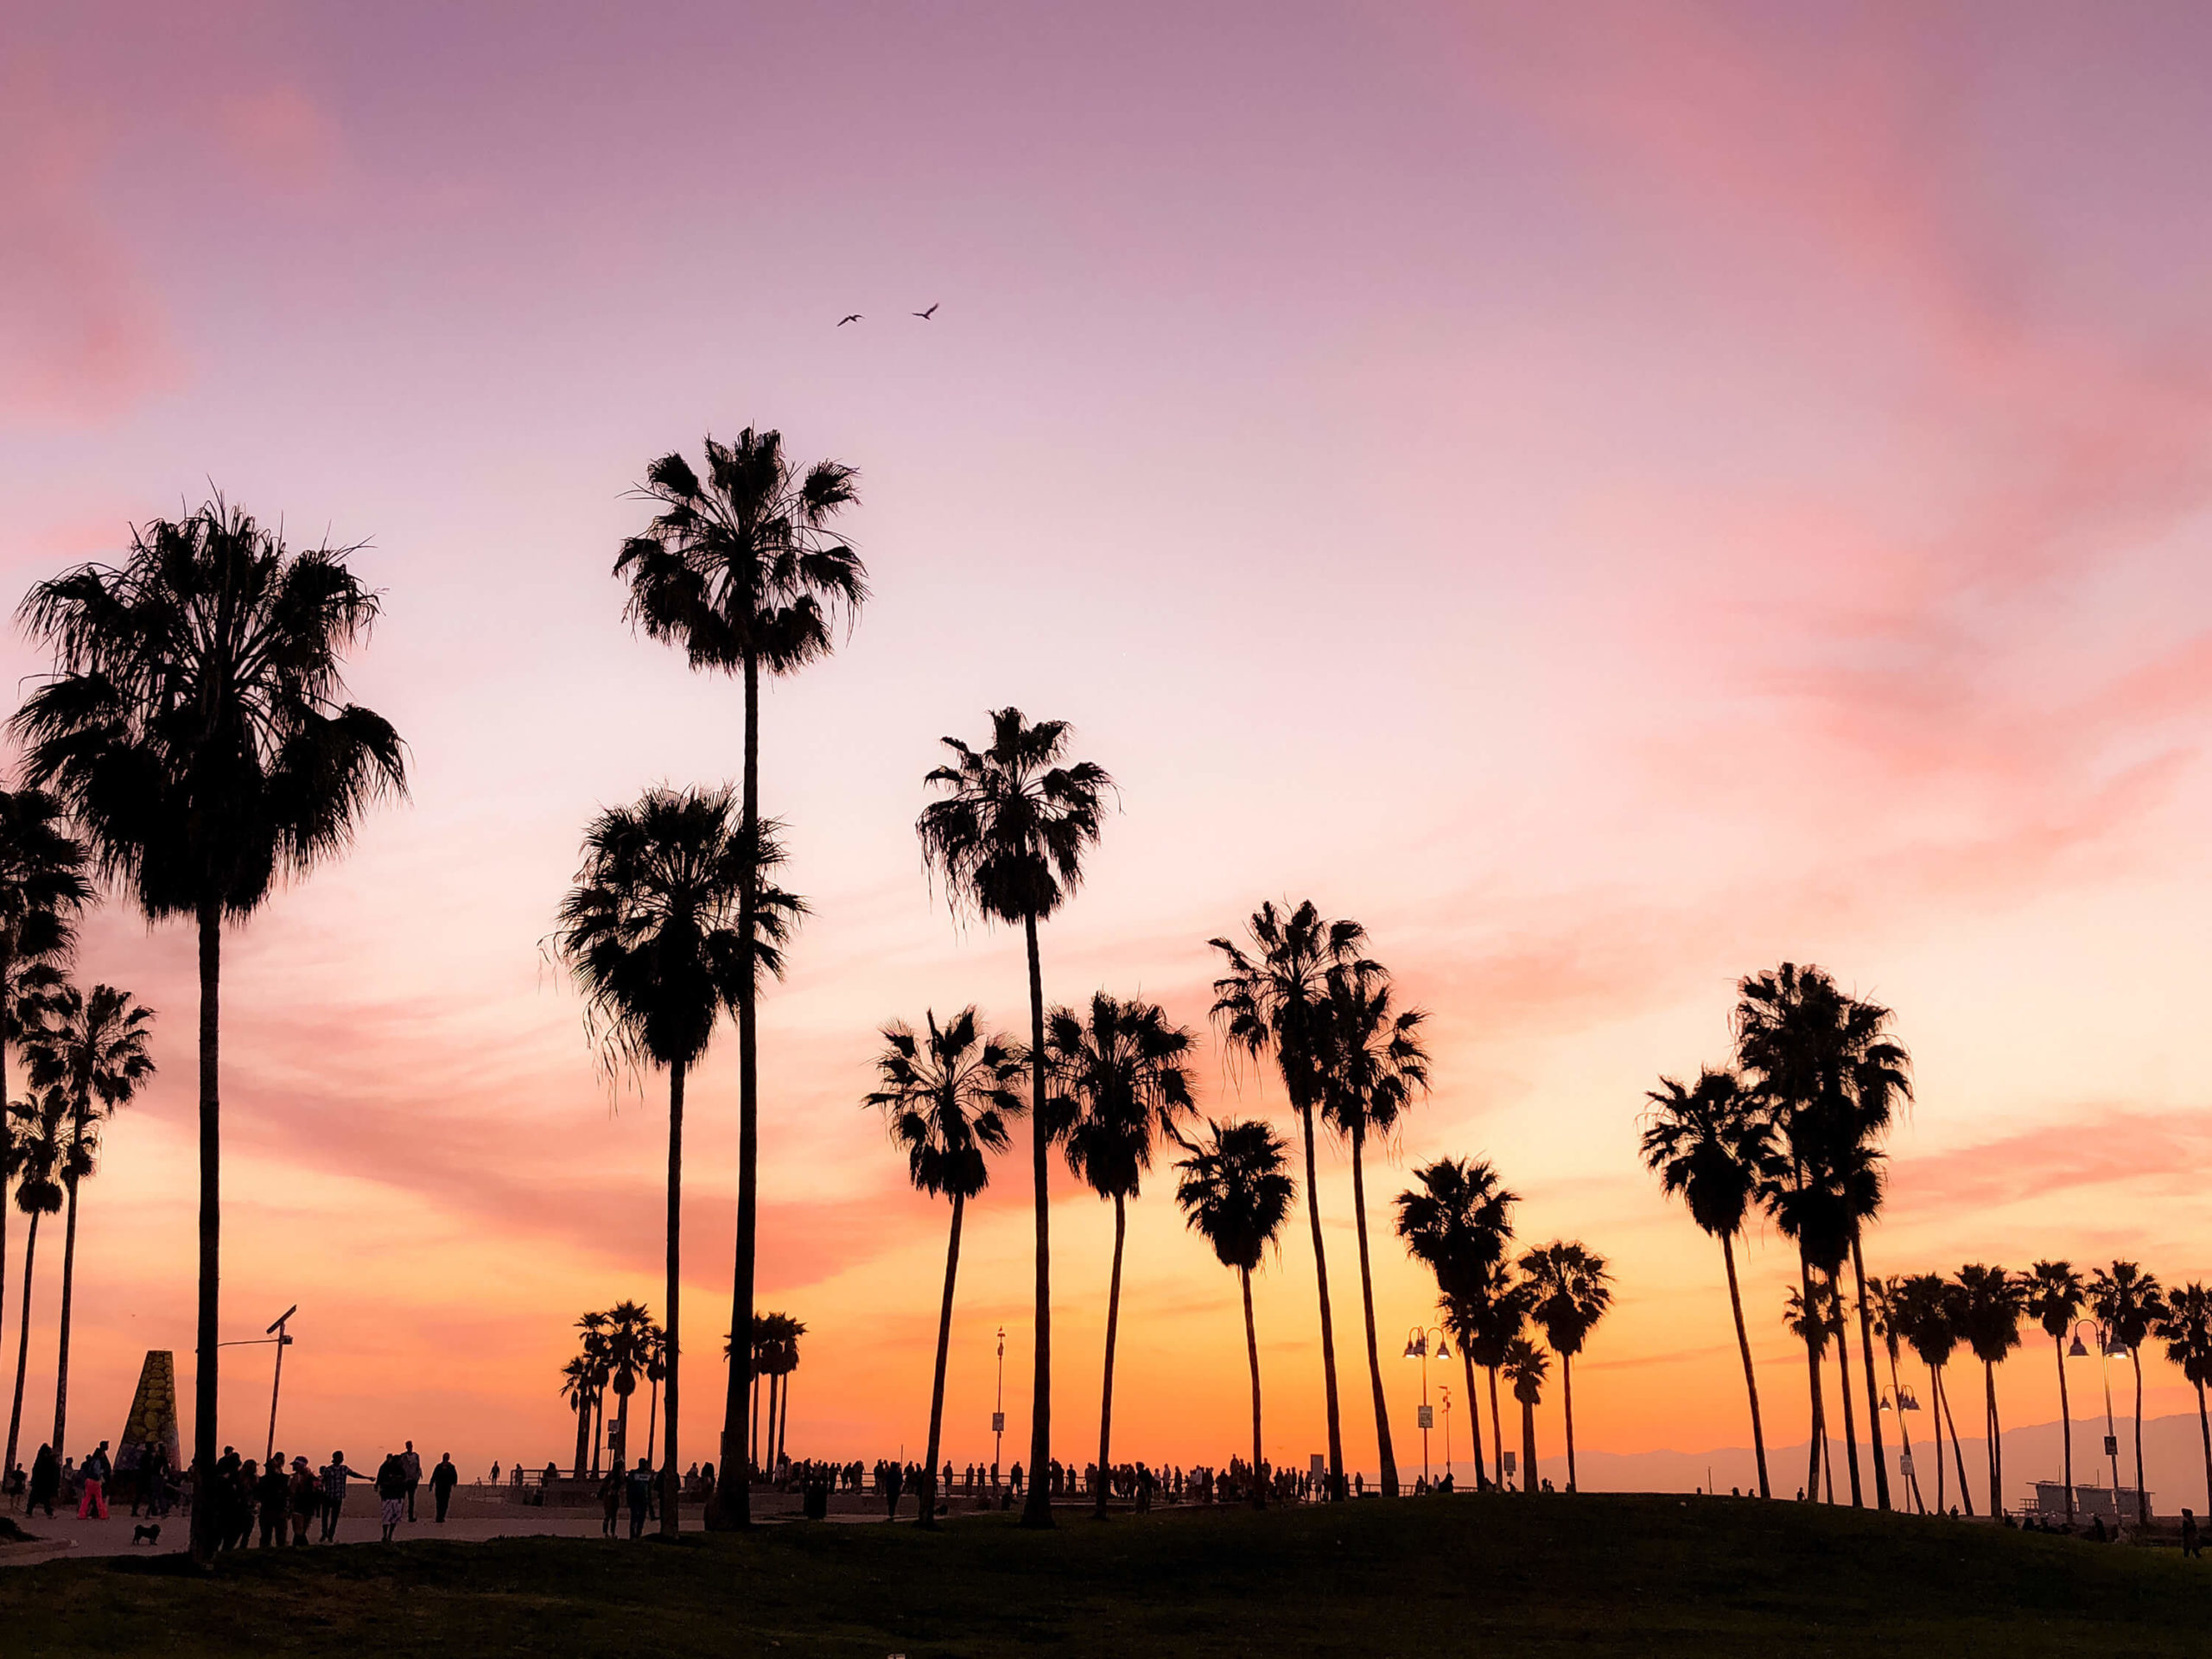 An image taken at sunset of large palm trees in a series at Los Angeles